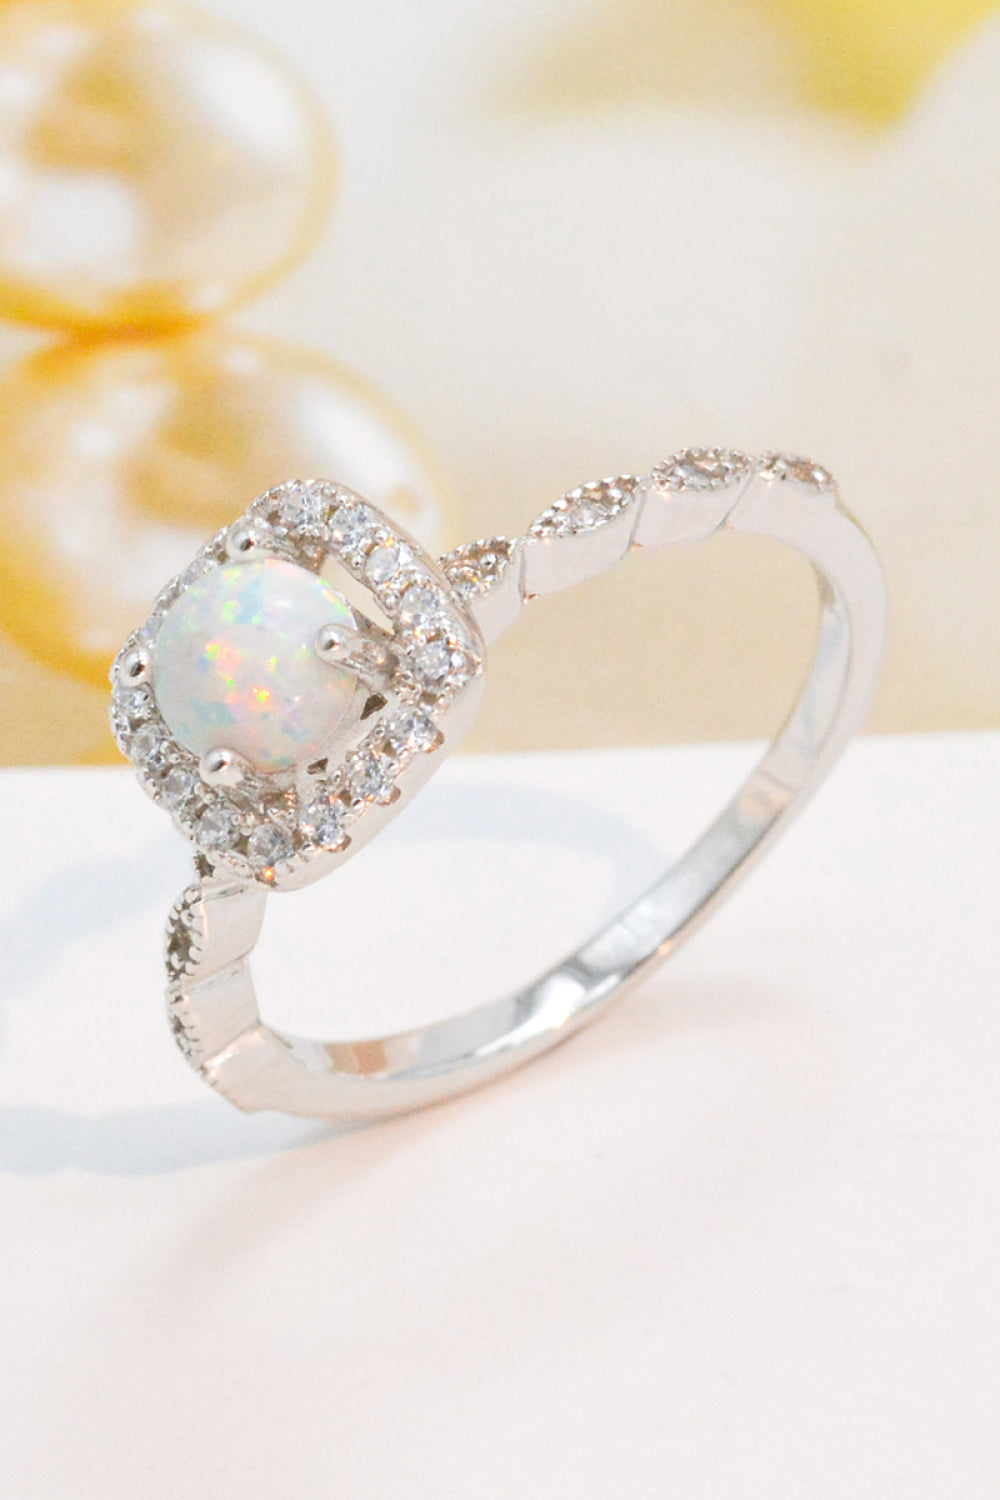 Women’s 925 Sterling Silver Inlaid Opal Ring